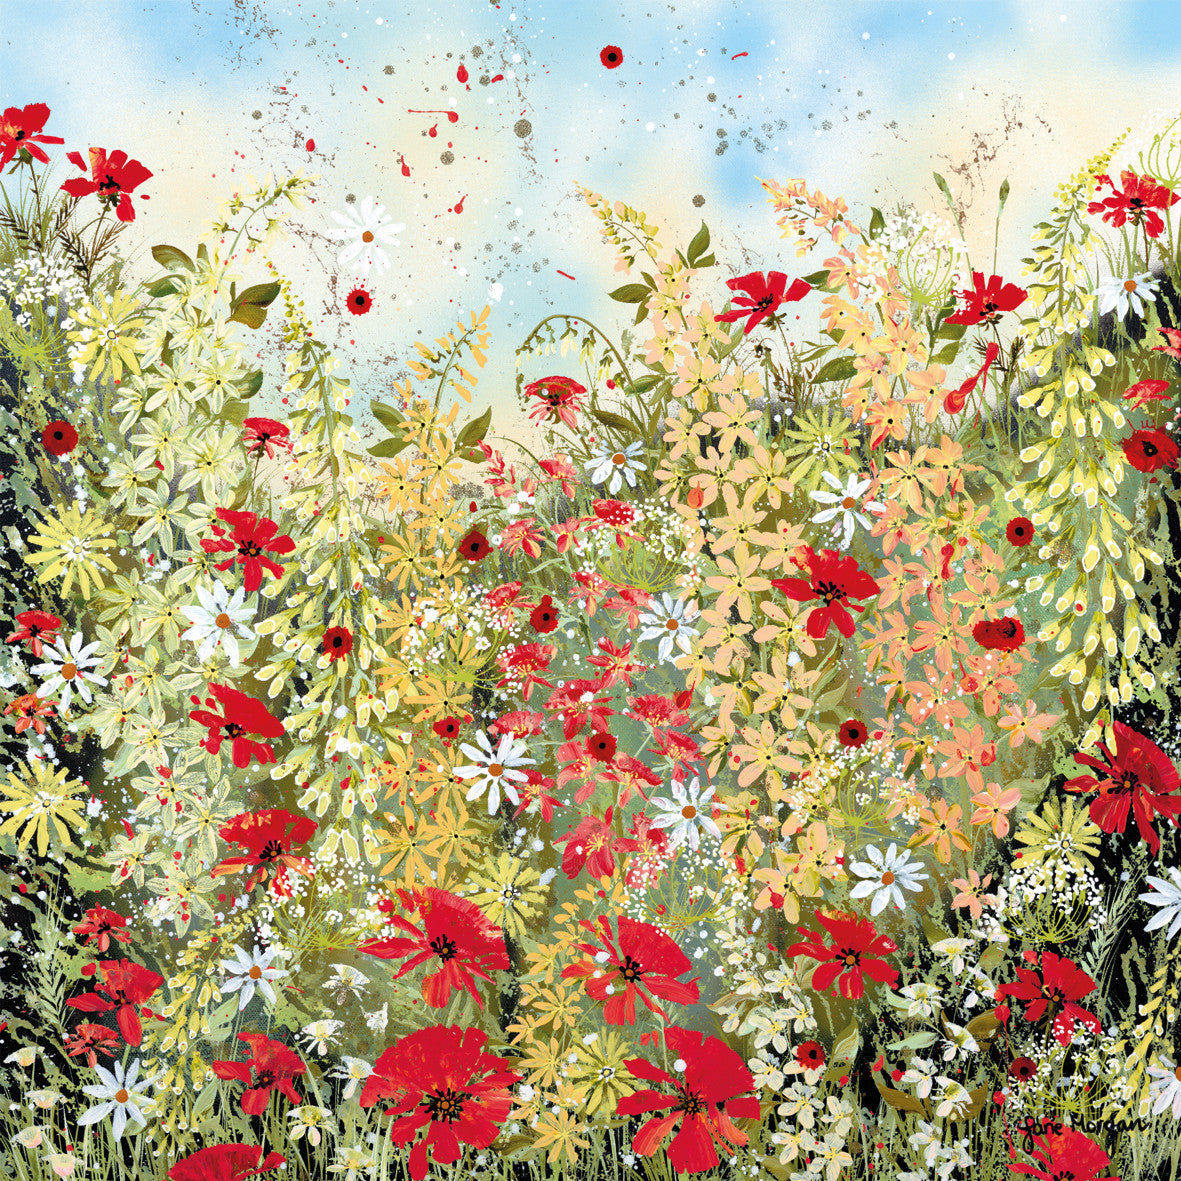 'Red Poppies' Eco-Friendly Greetings Card